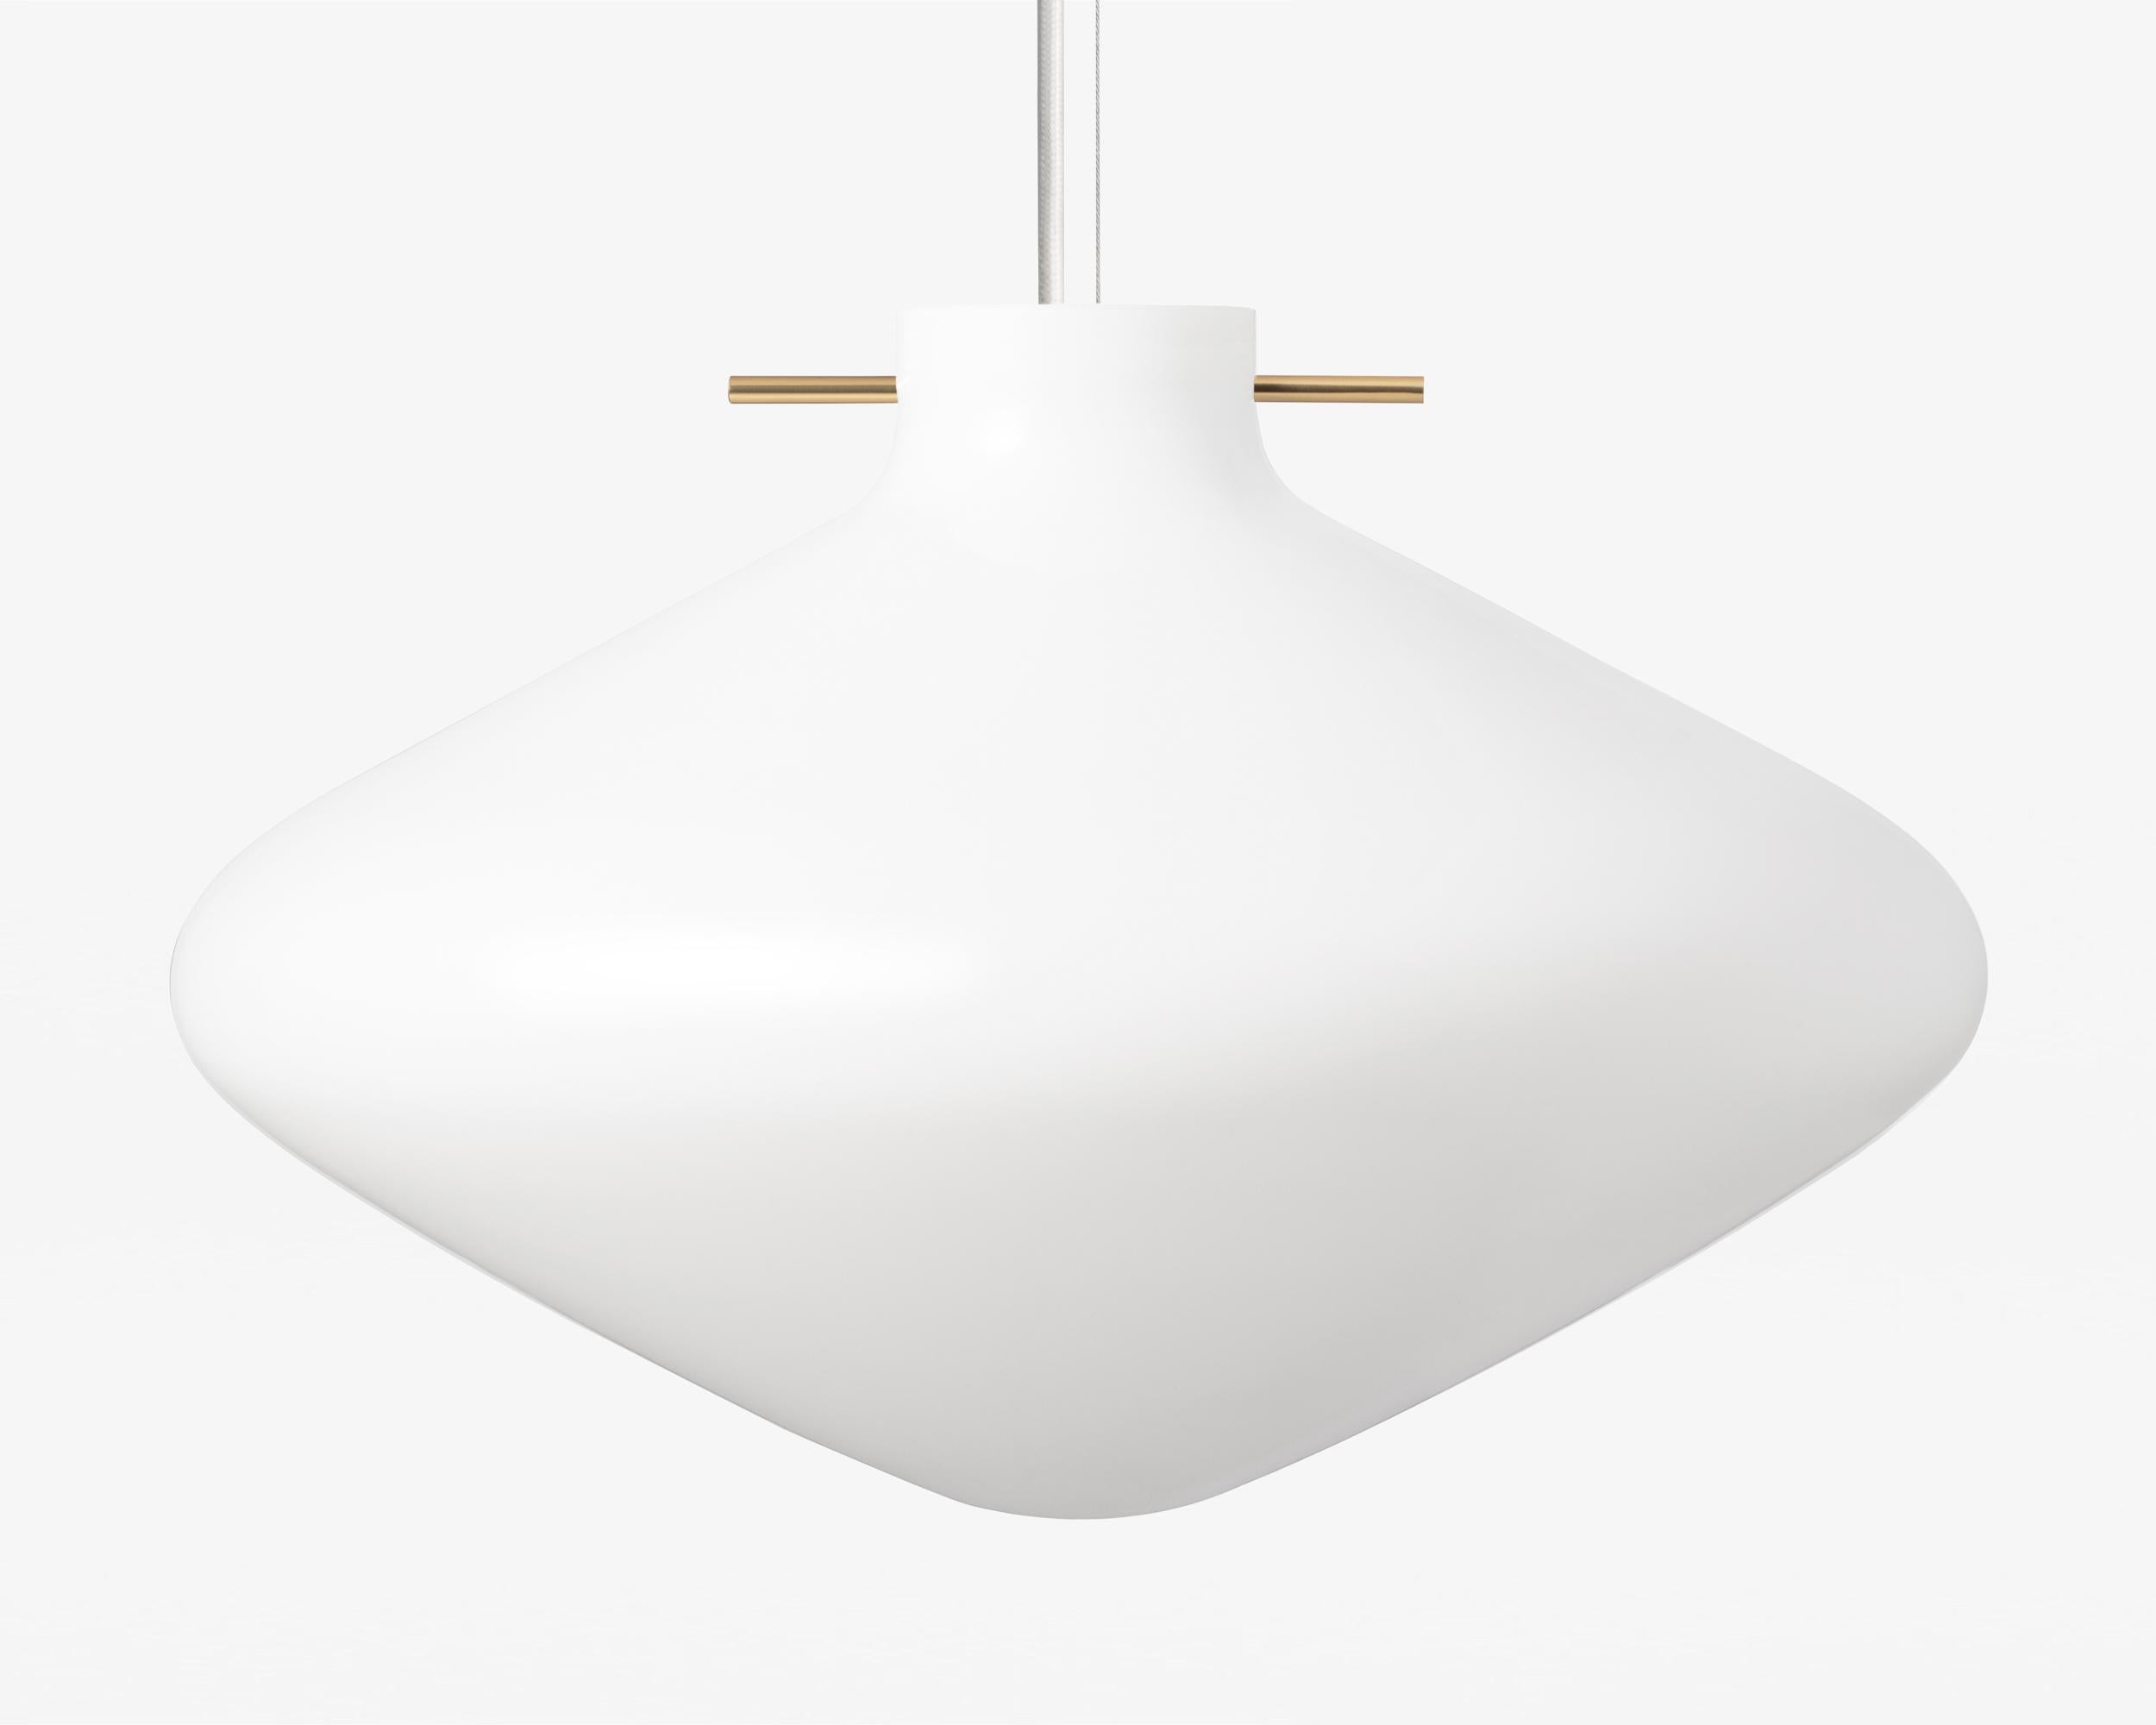 Pendant lamp repose / 400 by LYFA

Pendant lamp signed by GamFratesi for LYFA

Measures: D.260 mm H.252 mm
Opal glass / black steel or brass

Textile wire (black or white) 300cm
Light source: E27 max 60W (110V-230V)

-- 
Repose is a new